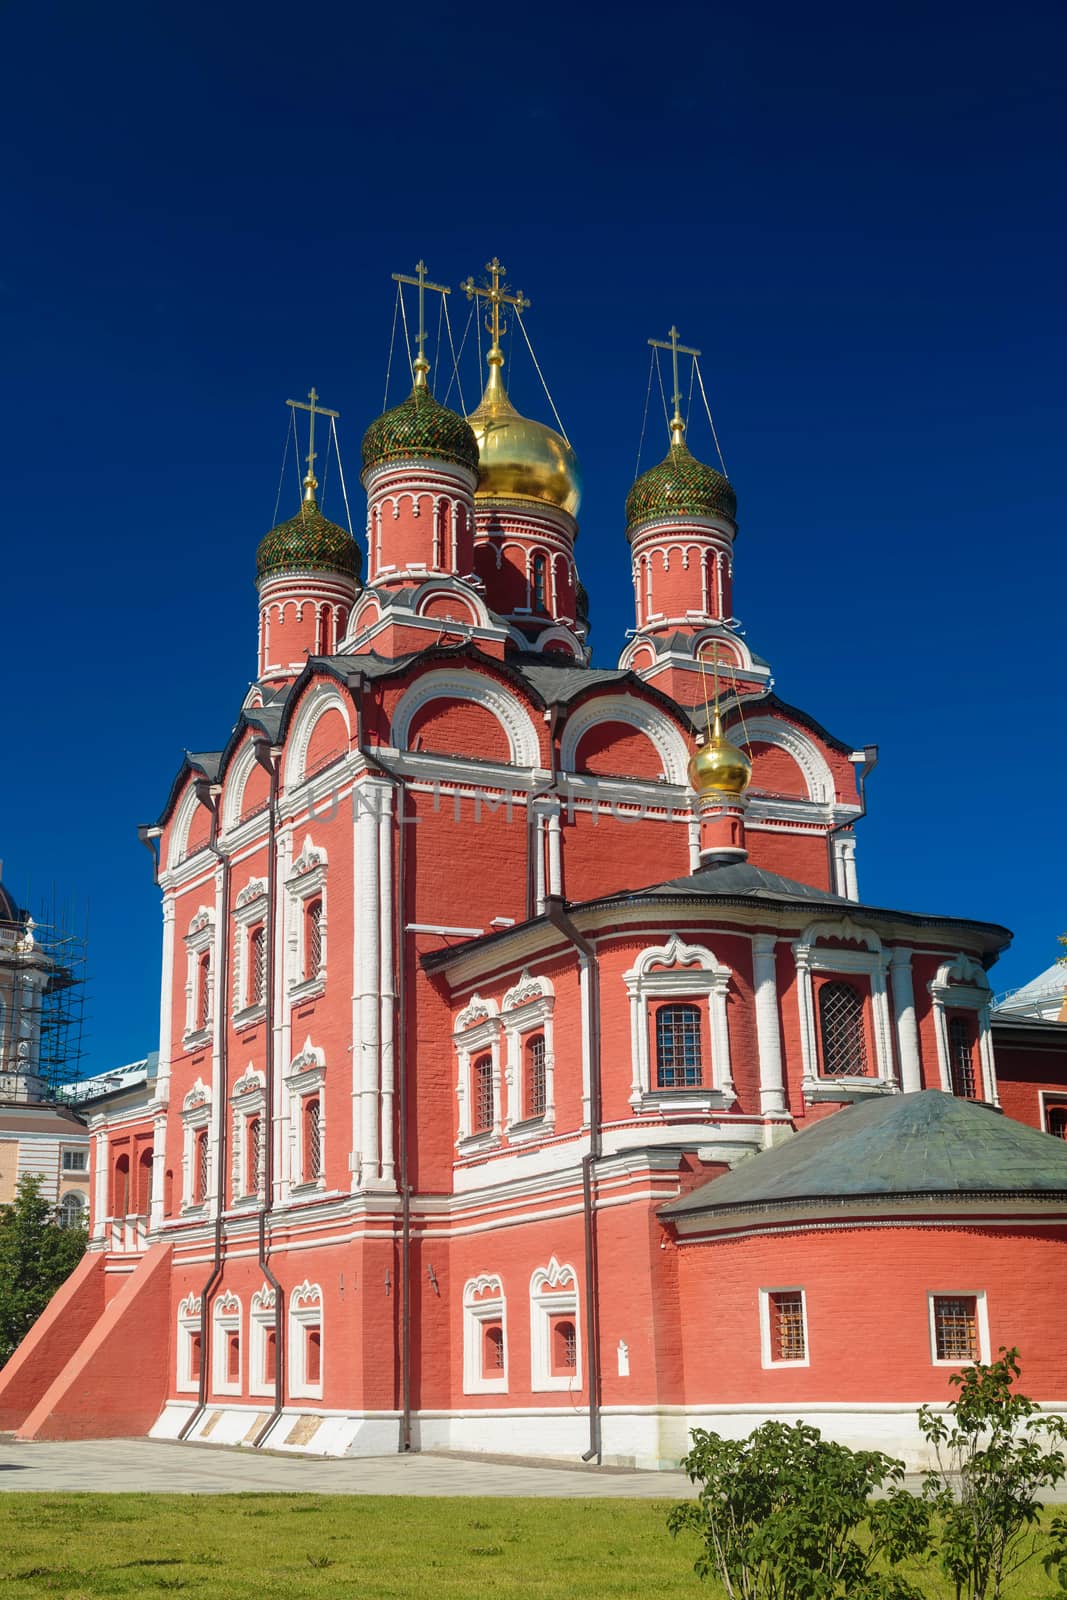 Facade of red brick Christian cathedral building in Moscow by galinasharapova